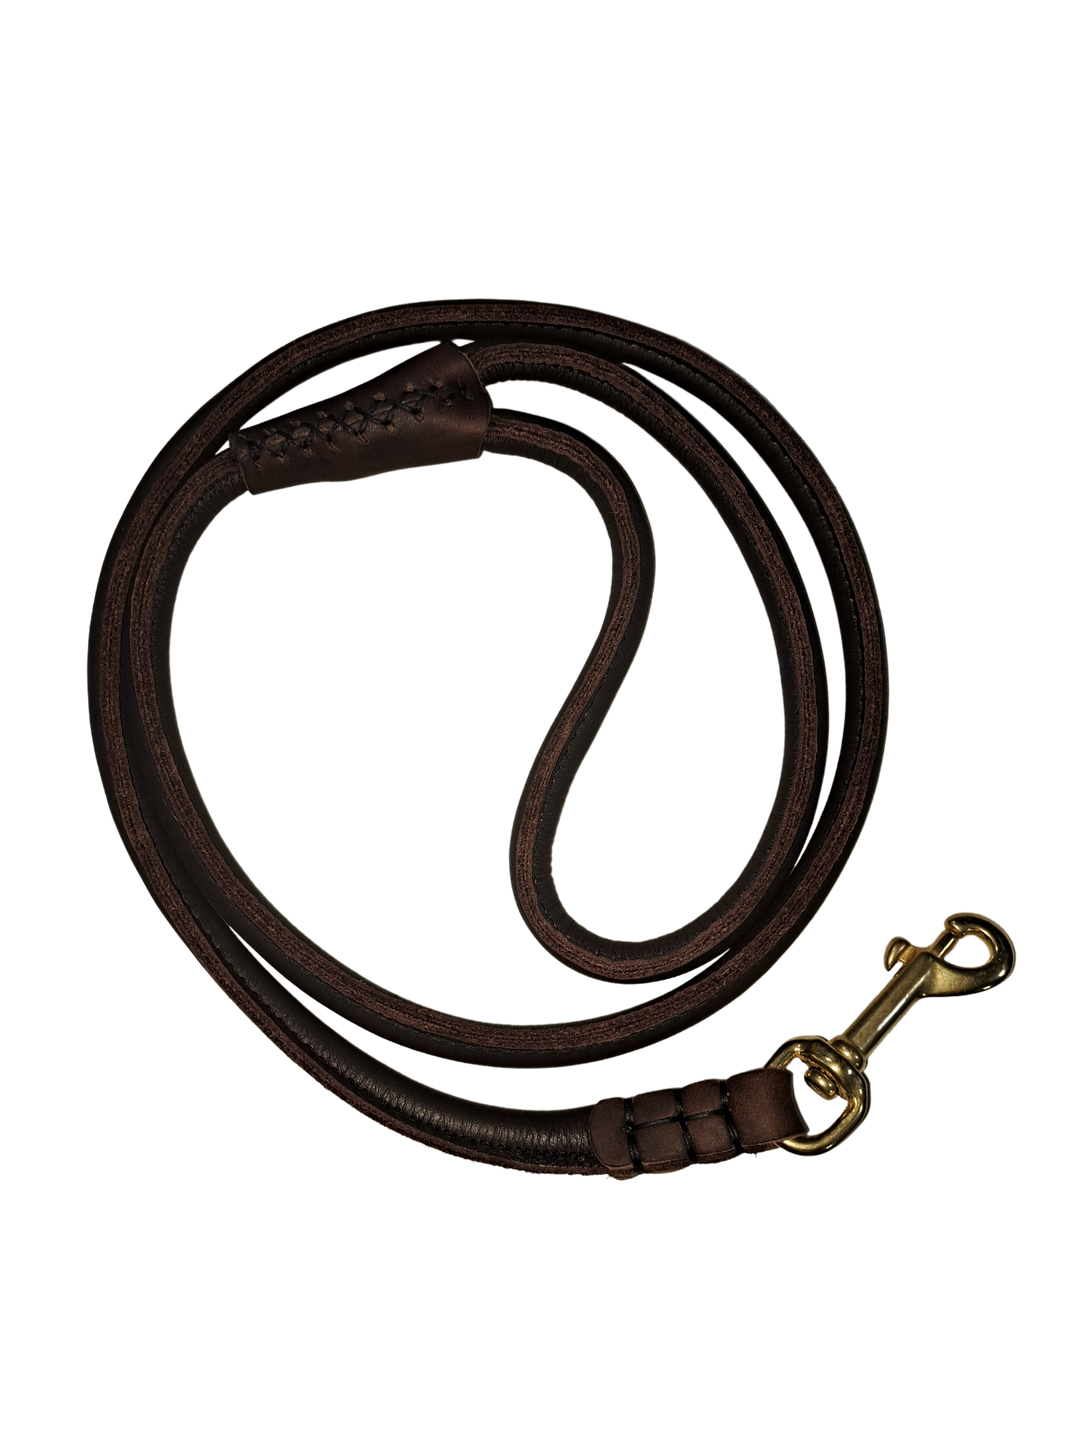 4ft HANDCRAFTED ROLLED LEATHER DOG LEASH